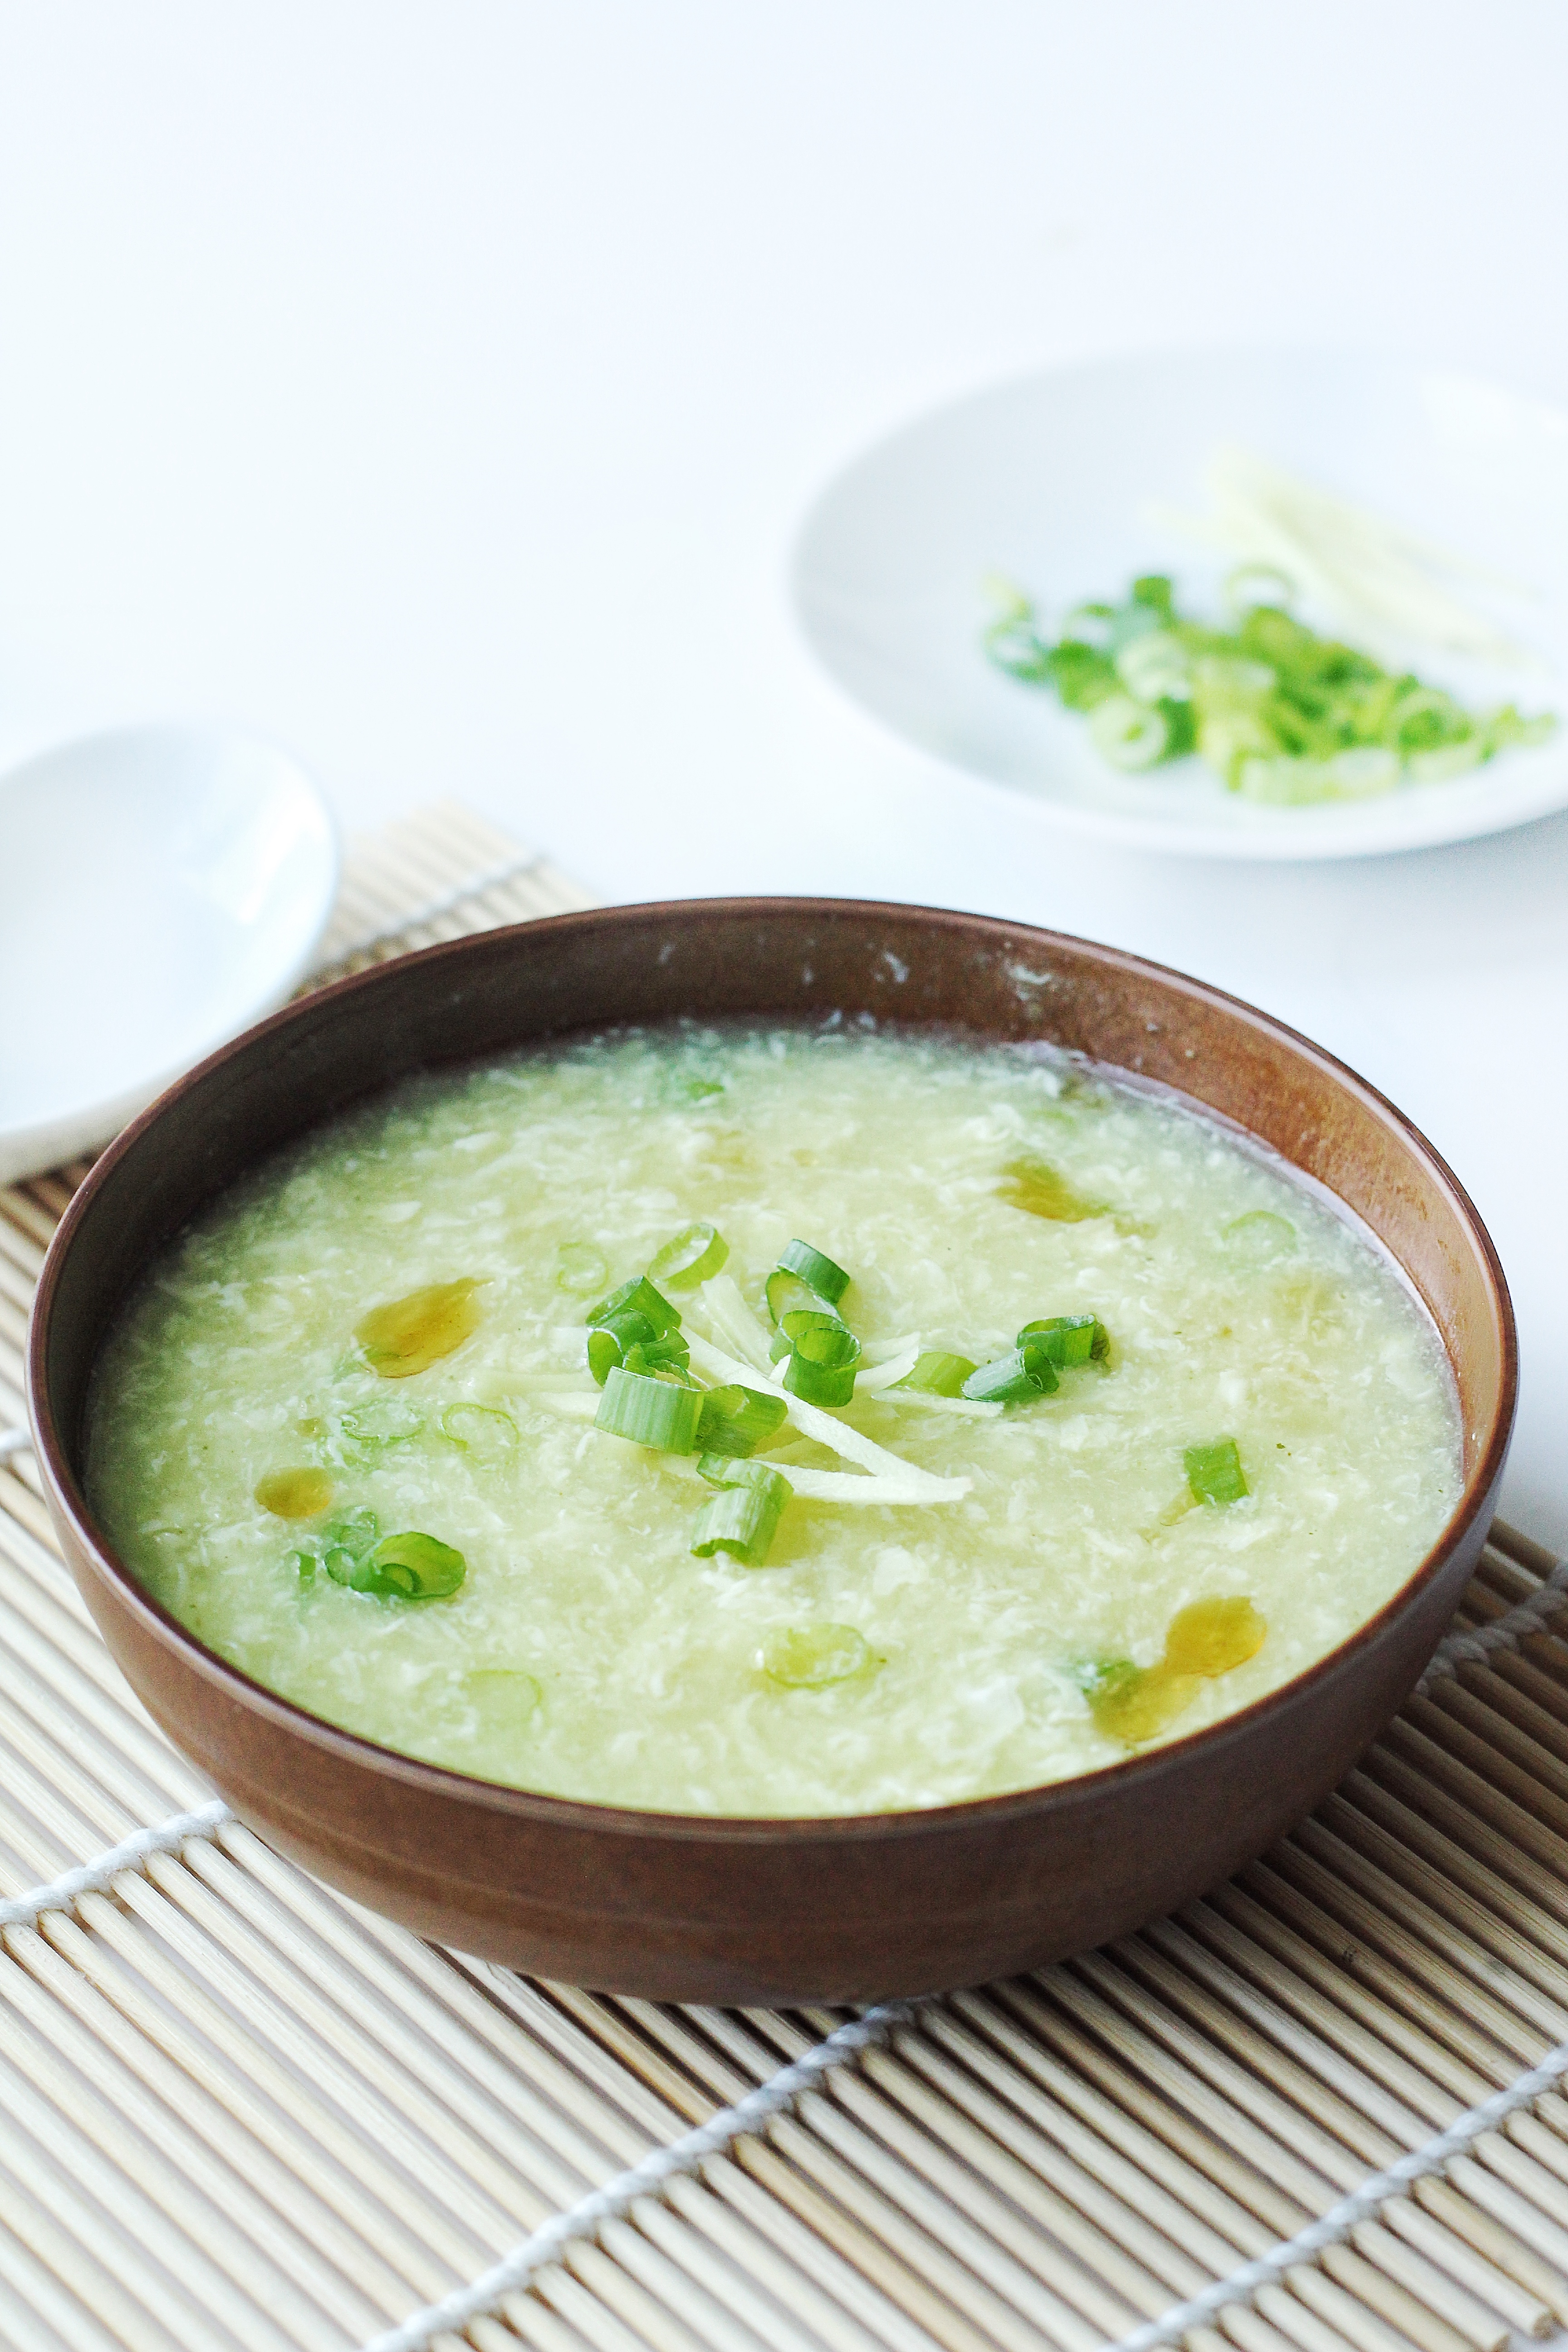 Chinese Egg Drop Soup Recipe